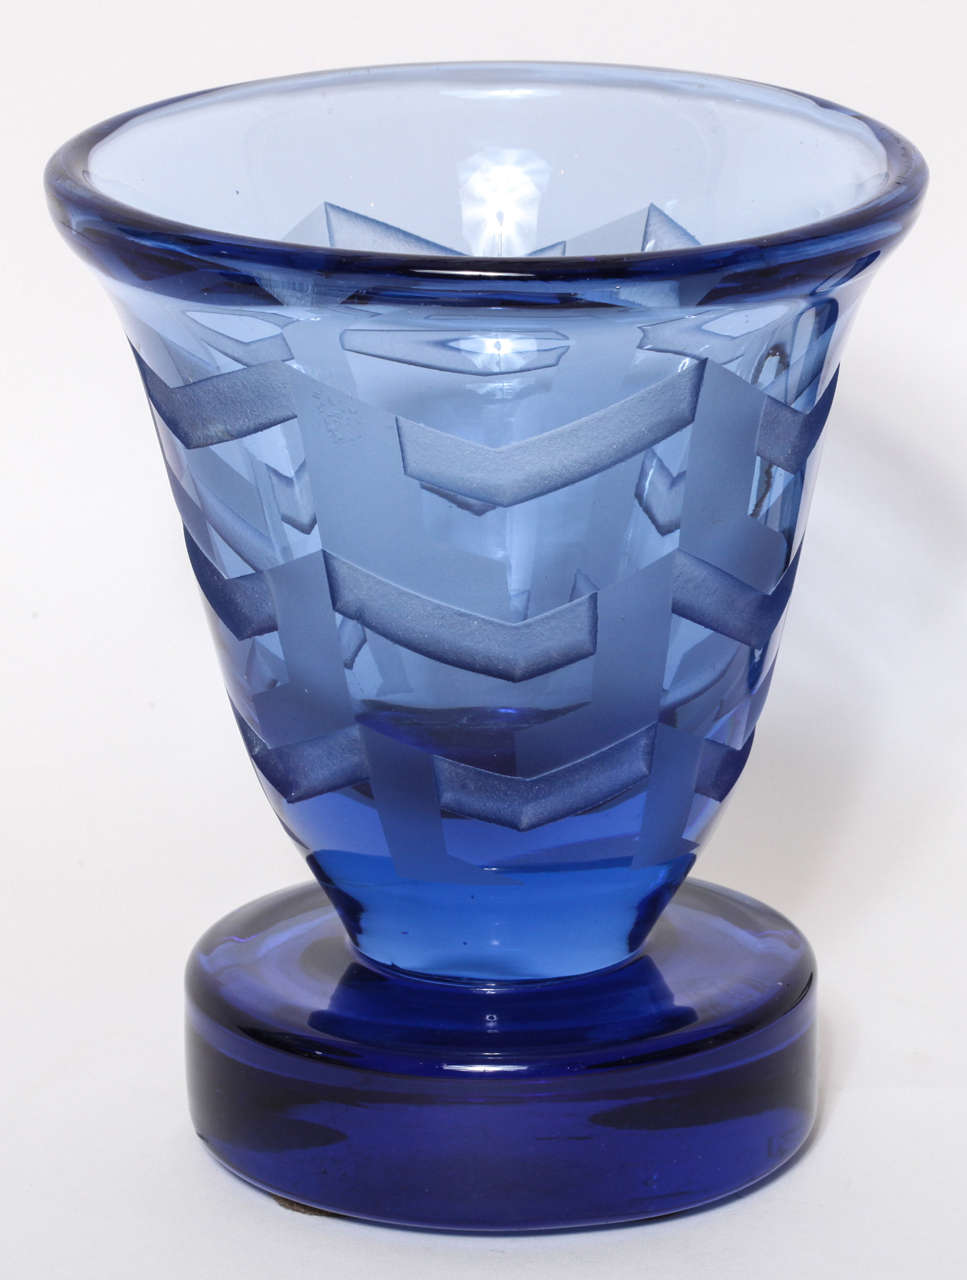 Blue glass vase has acid etched geometric designs by Jean Luce (1895-1964), Paris.
Signed: artist's monogram

Jean Luce worked as a designer in a cubist-inspired style, rejecting the use of too much design and figurativeness in decoration. He